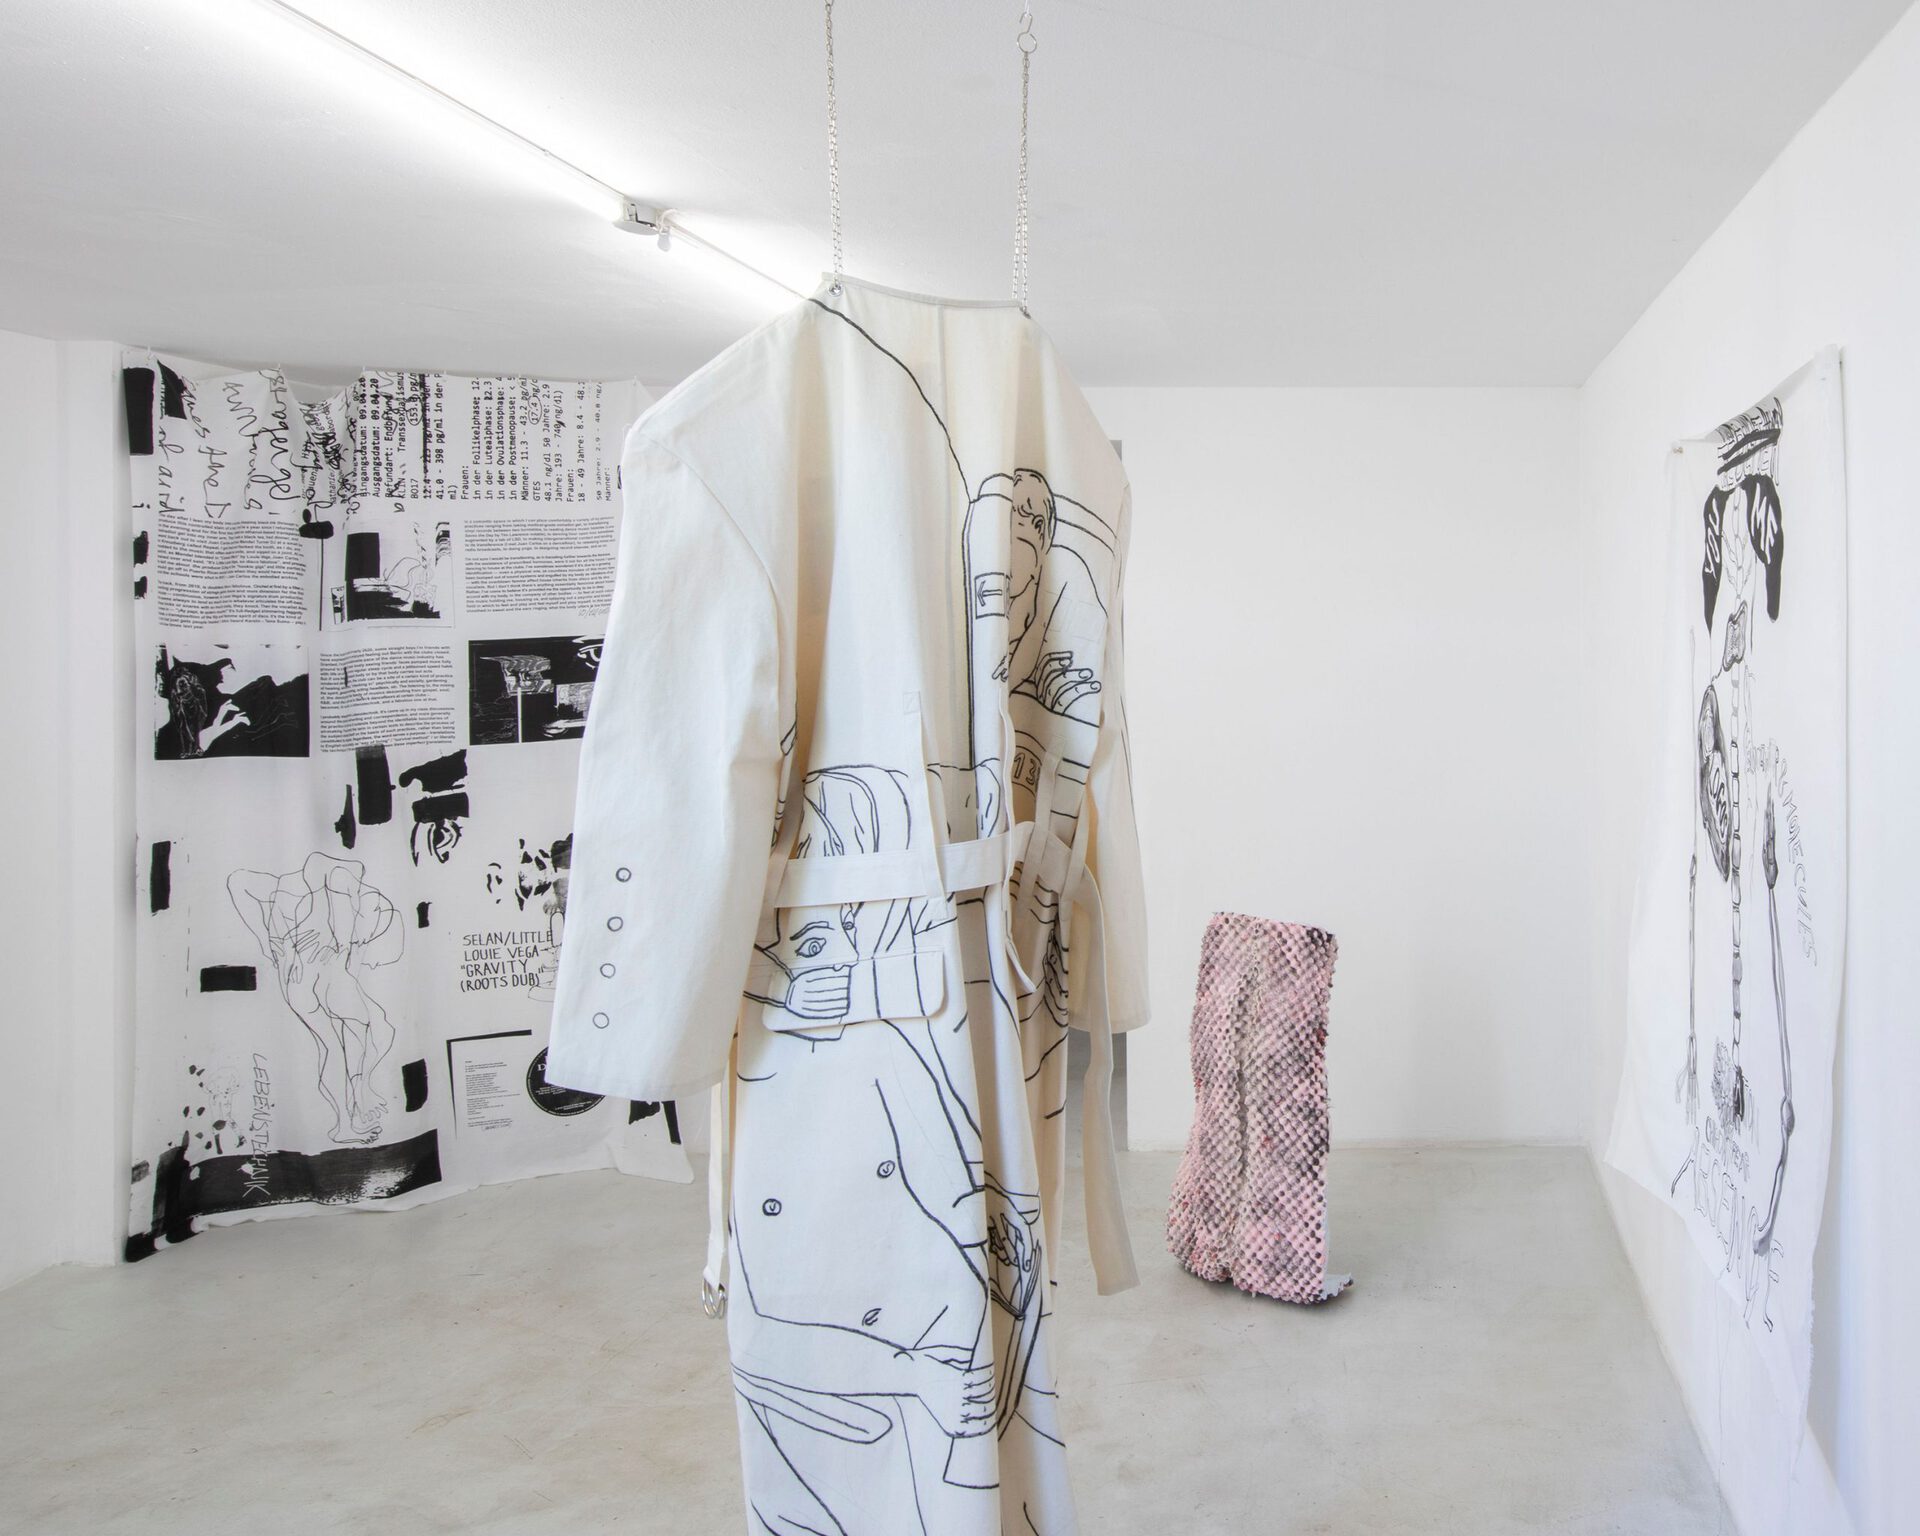 Group Show: Speaking in Tongues, Installation View, Blake & Vargas